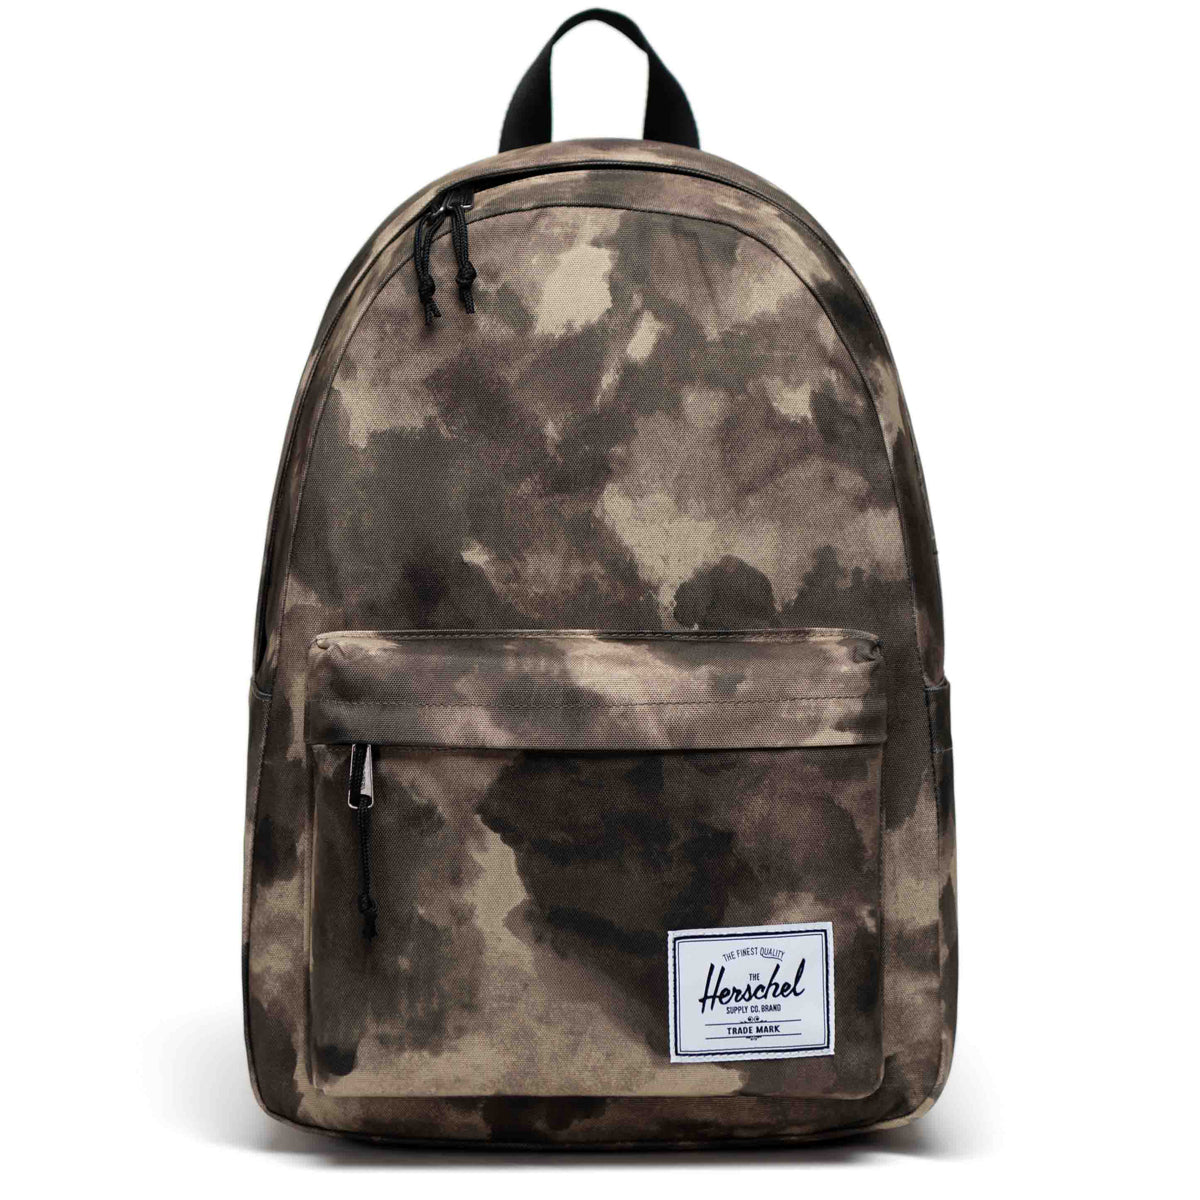 Herschel Supply Classic XL Backpack - Painted Camo image 1